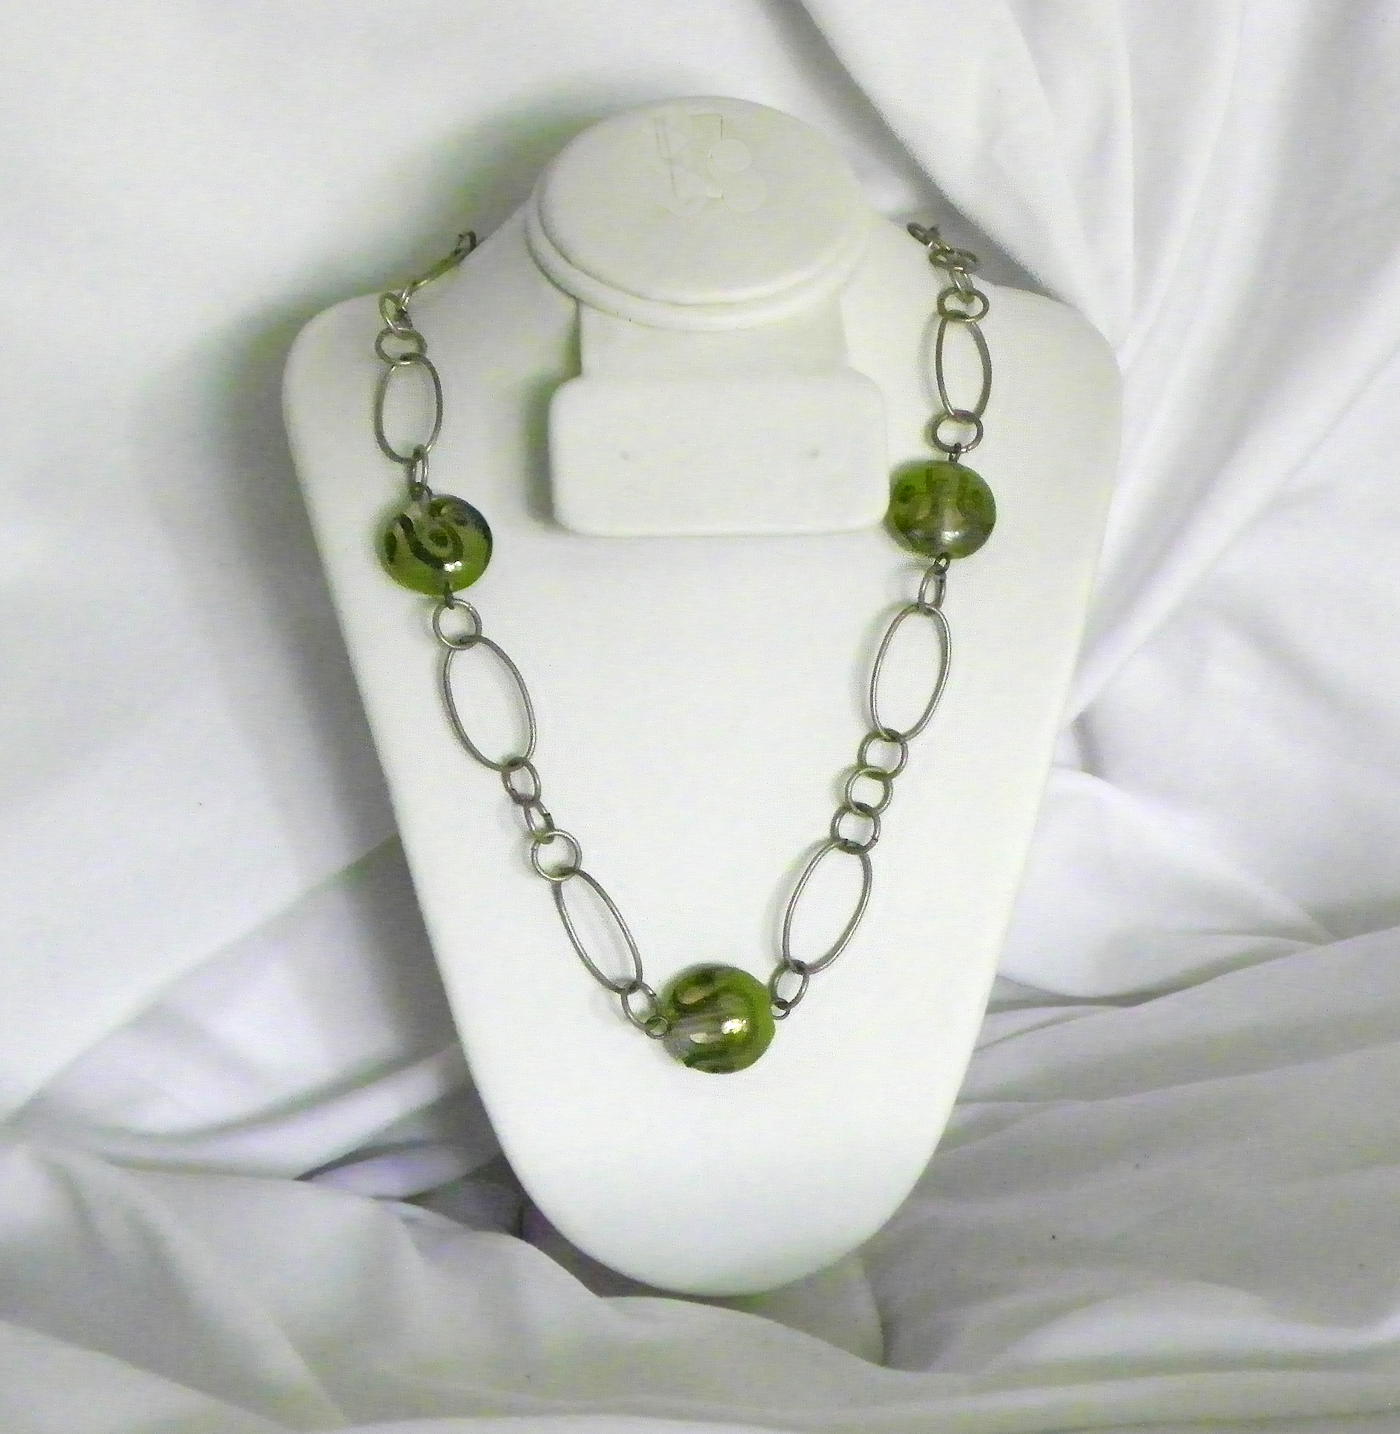 Pewter Finish Chain and Green Lampwork Glass Bead Necklace